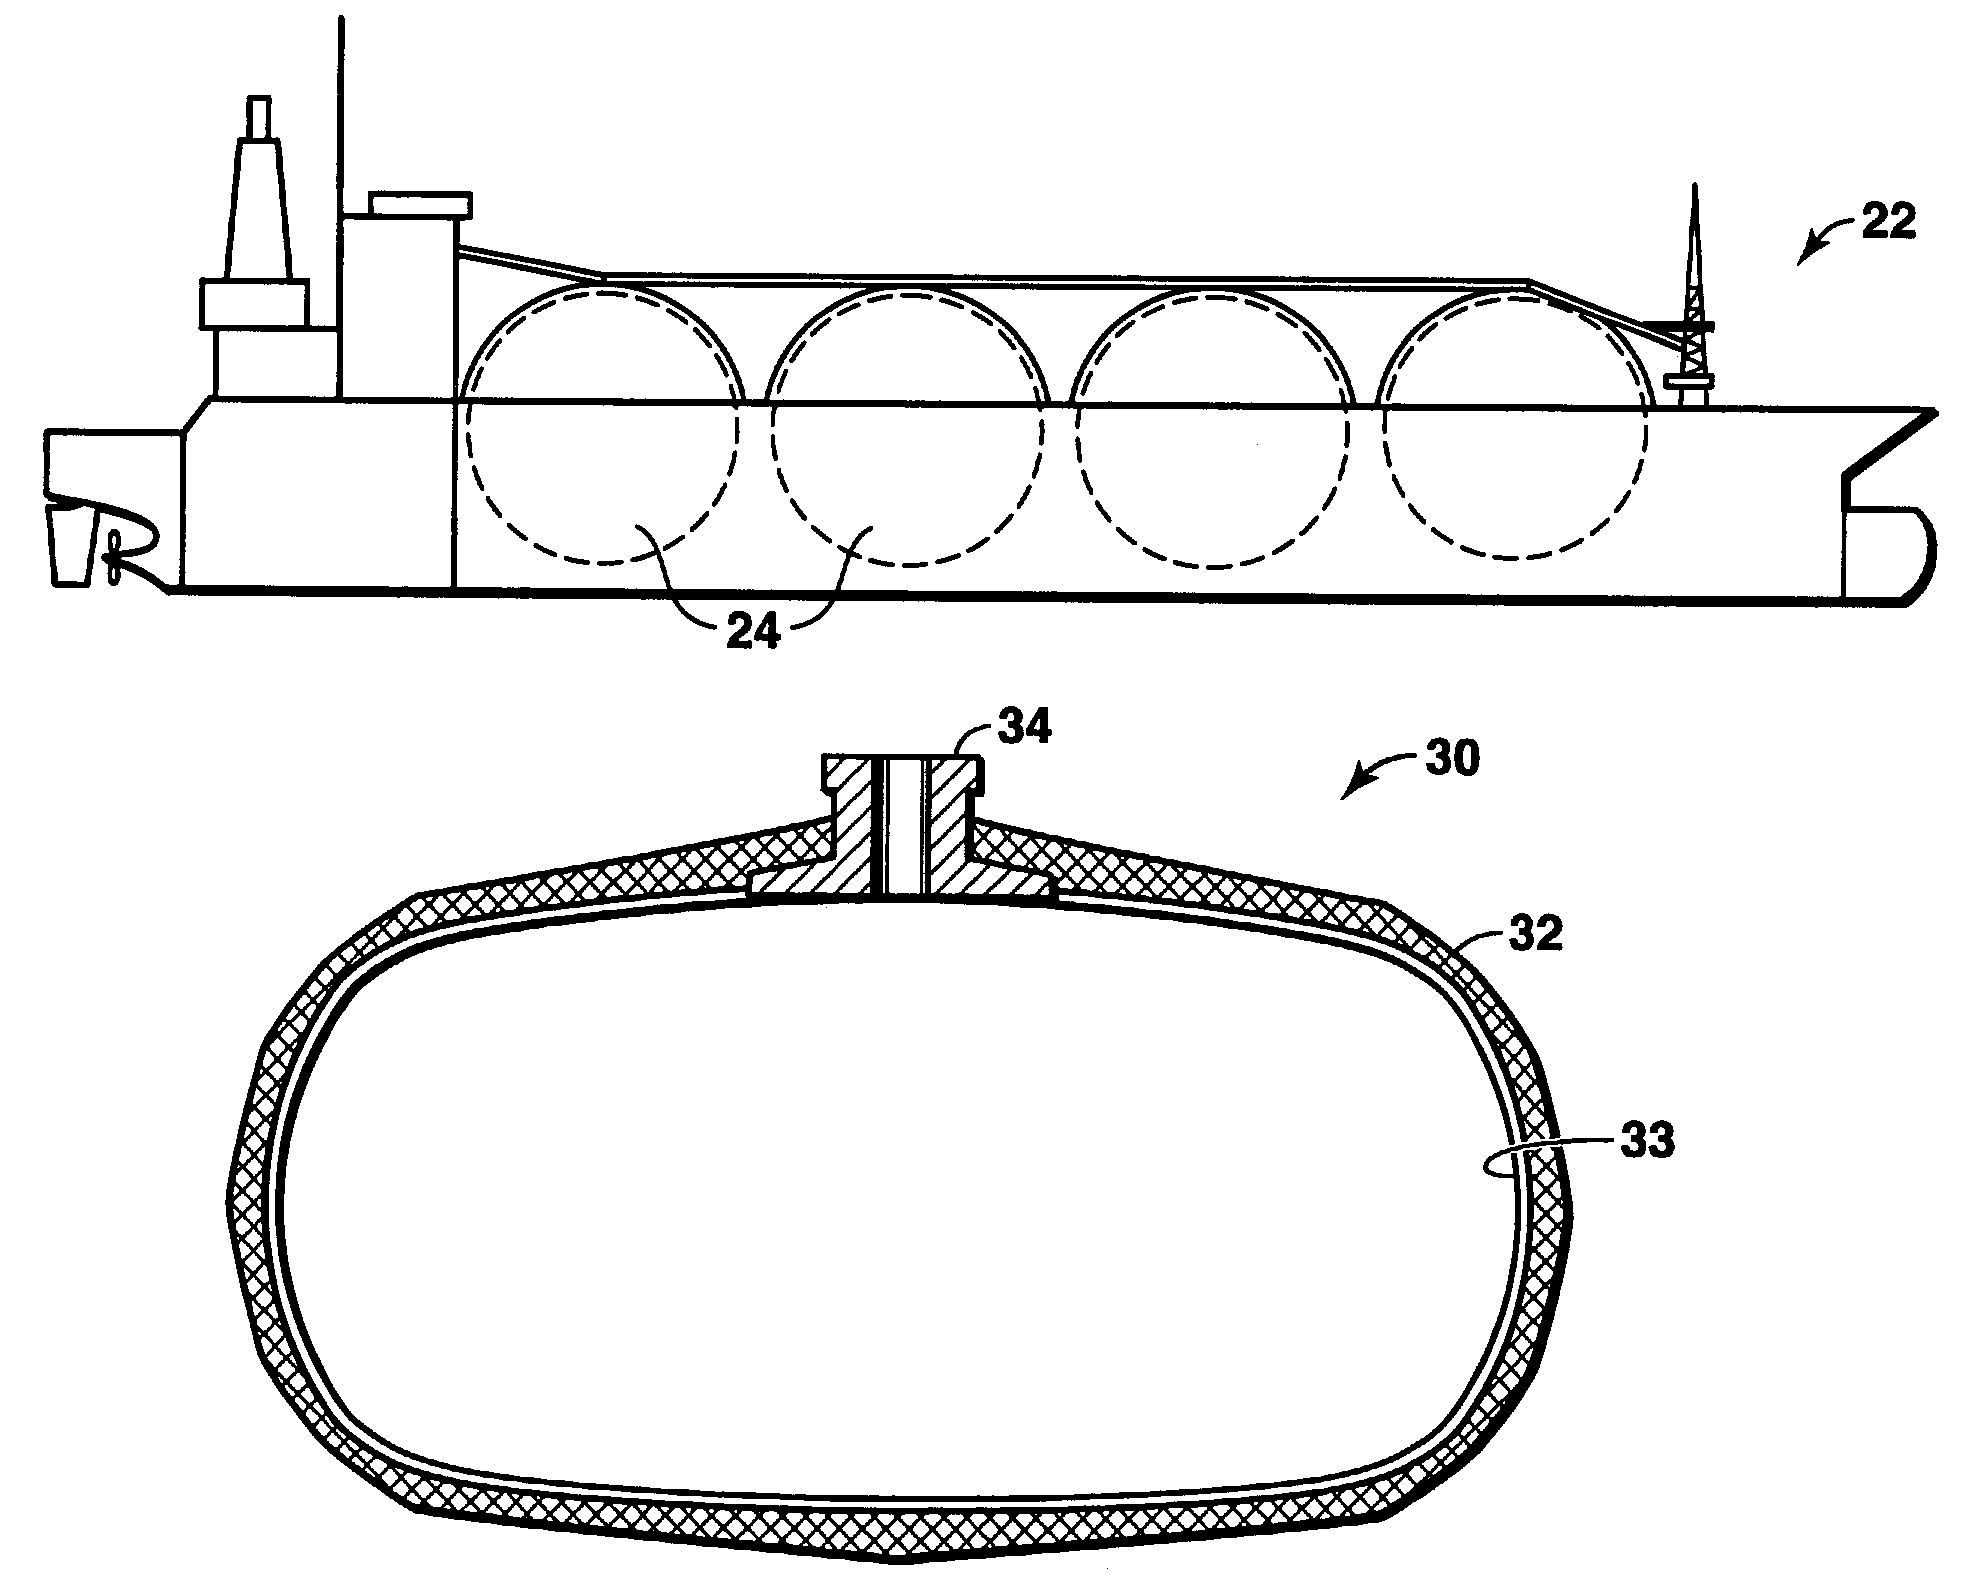 Containers and methods for containing pressurized fluids using reinforced fibers and methods for making such containers